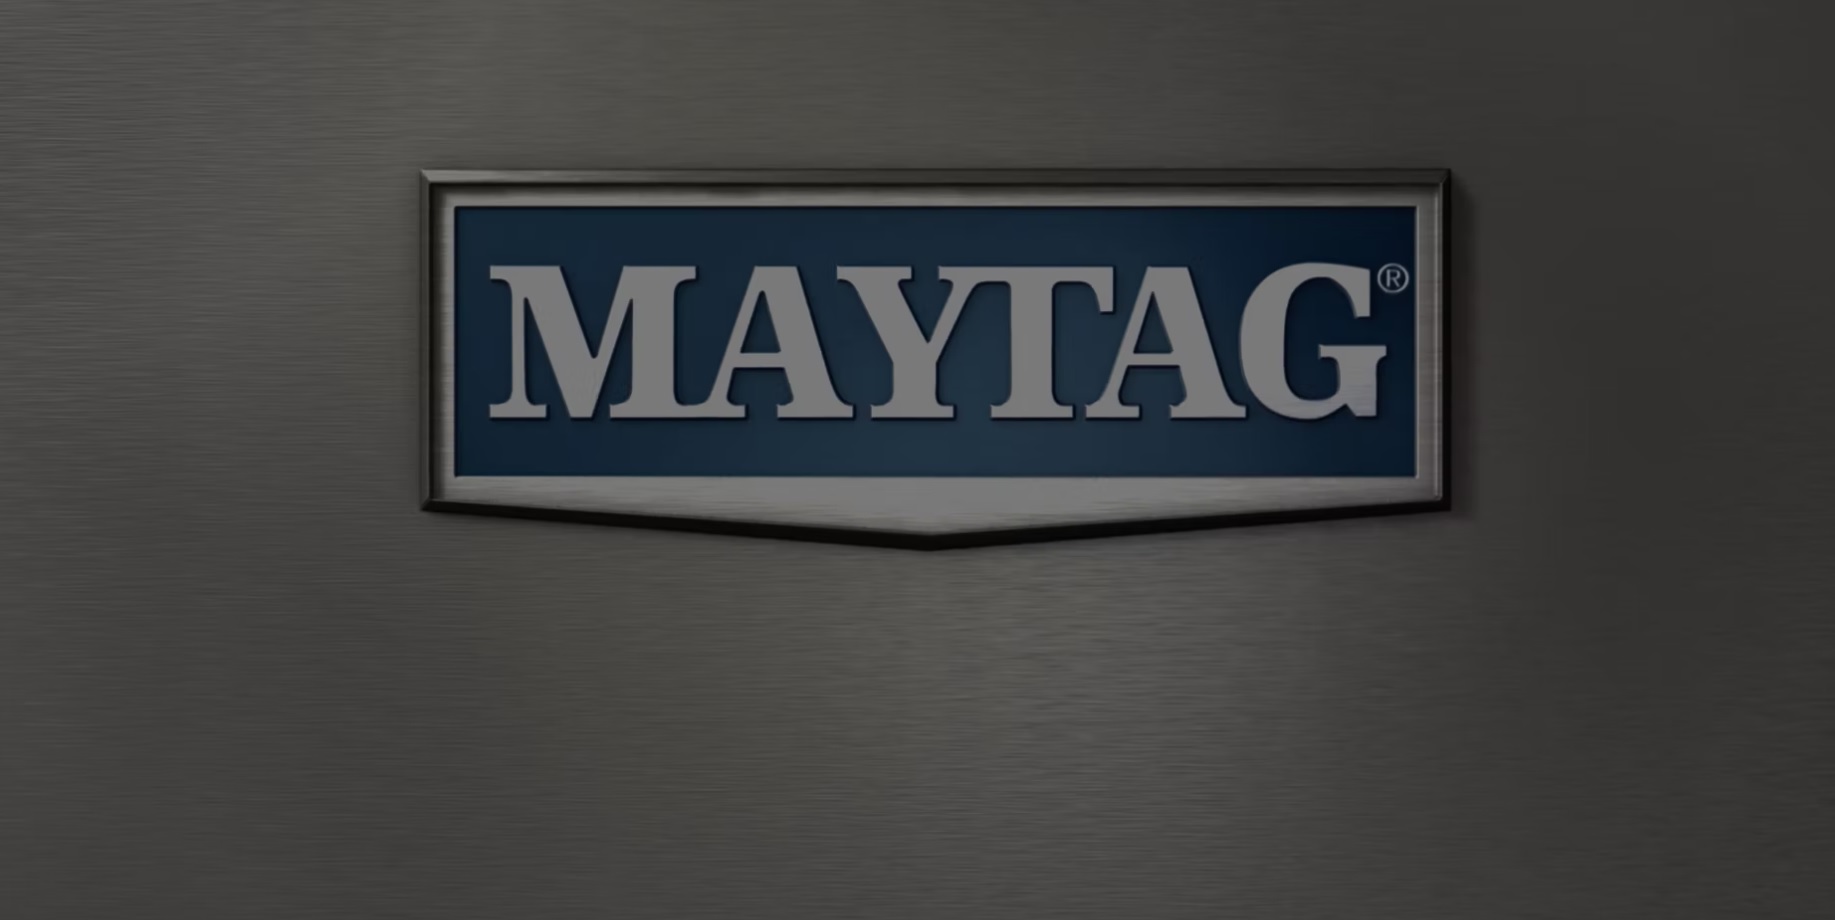 This commercial-grade Maytag® washer delivers high-grade performance to the home laundry room. Delivered straight from the commercial Maytag assembly line, this washer features a robust build, including a 1/2 horsepower motor and dual-action agitator, surrounded by thick, galvanized steel paneling engineered to take a beating and resist corrosion. Tough and dependable year after year, we confidently back this washer with our best residential* warranty for an in-home, commercial-grade laundry appliance.** *When used only in a single-family home for non-commercial purposes. **Visit maytag.com for Limited Warranty details.